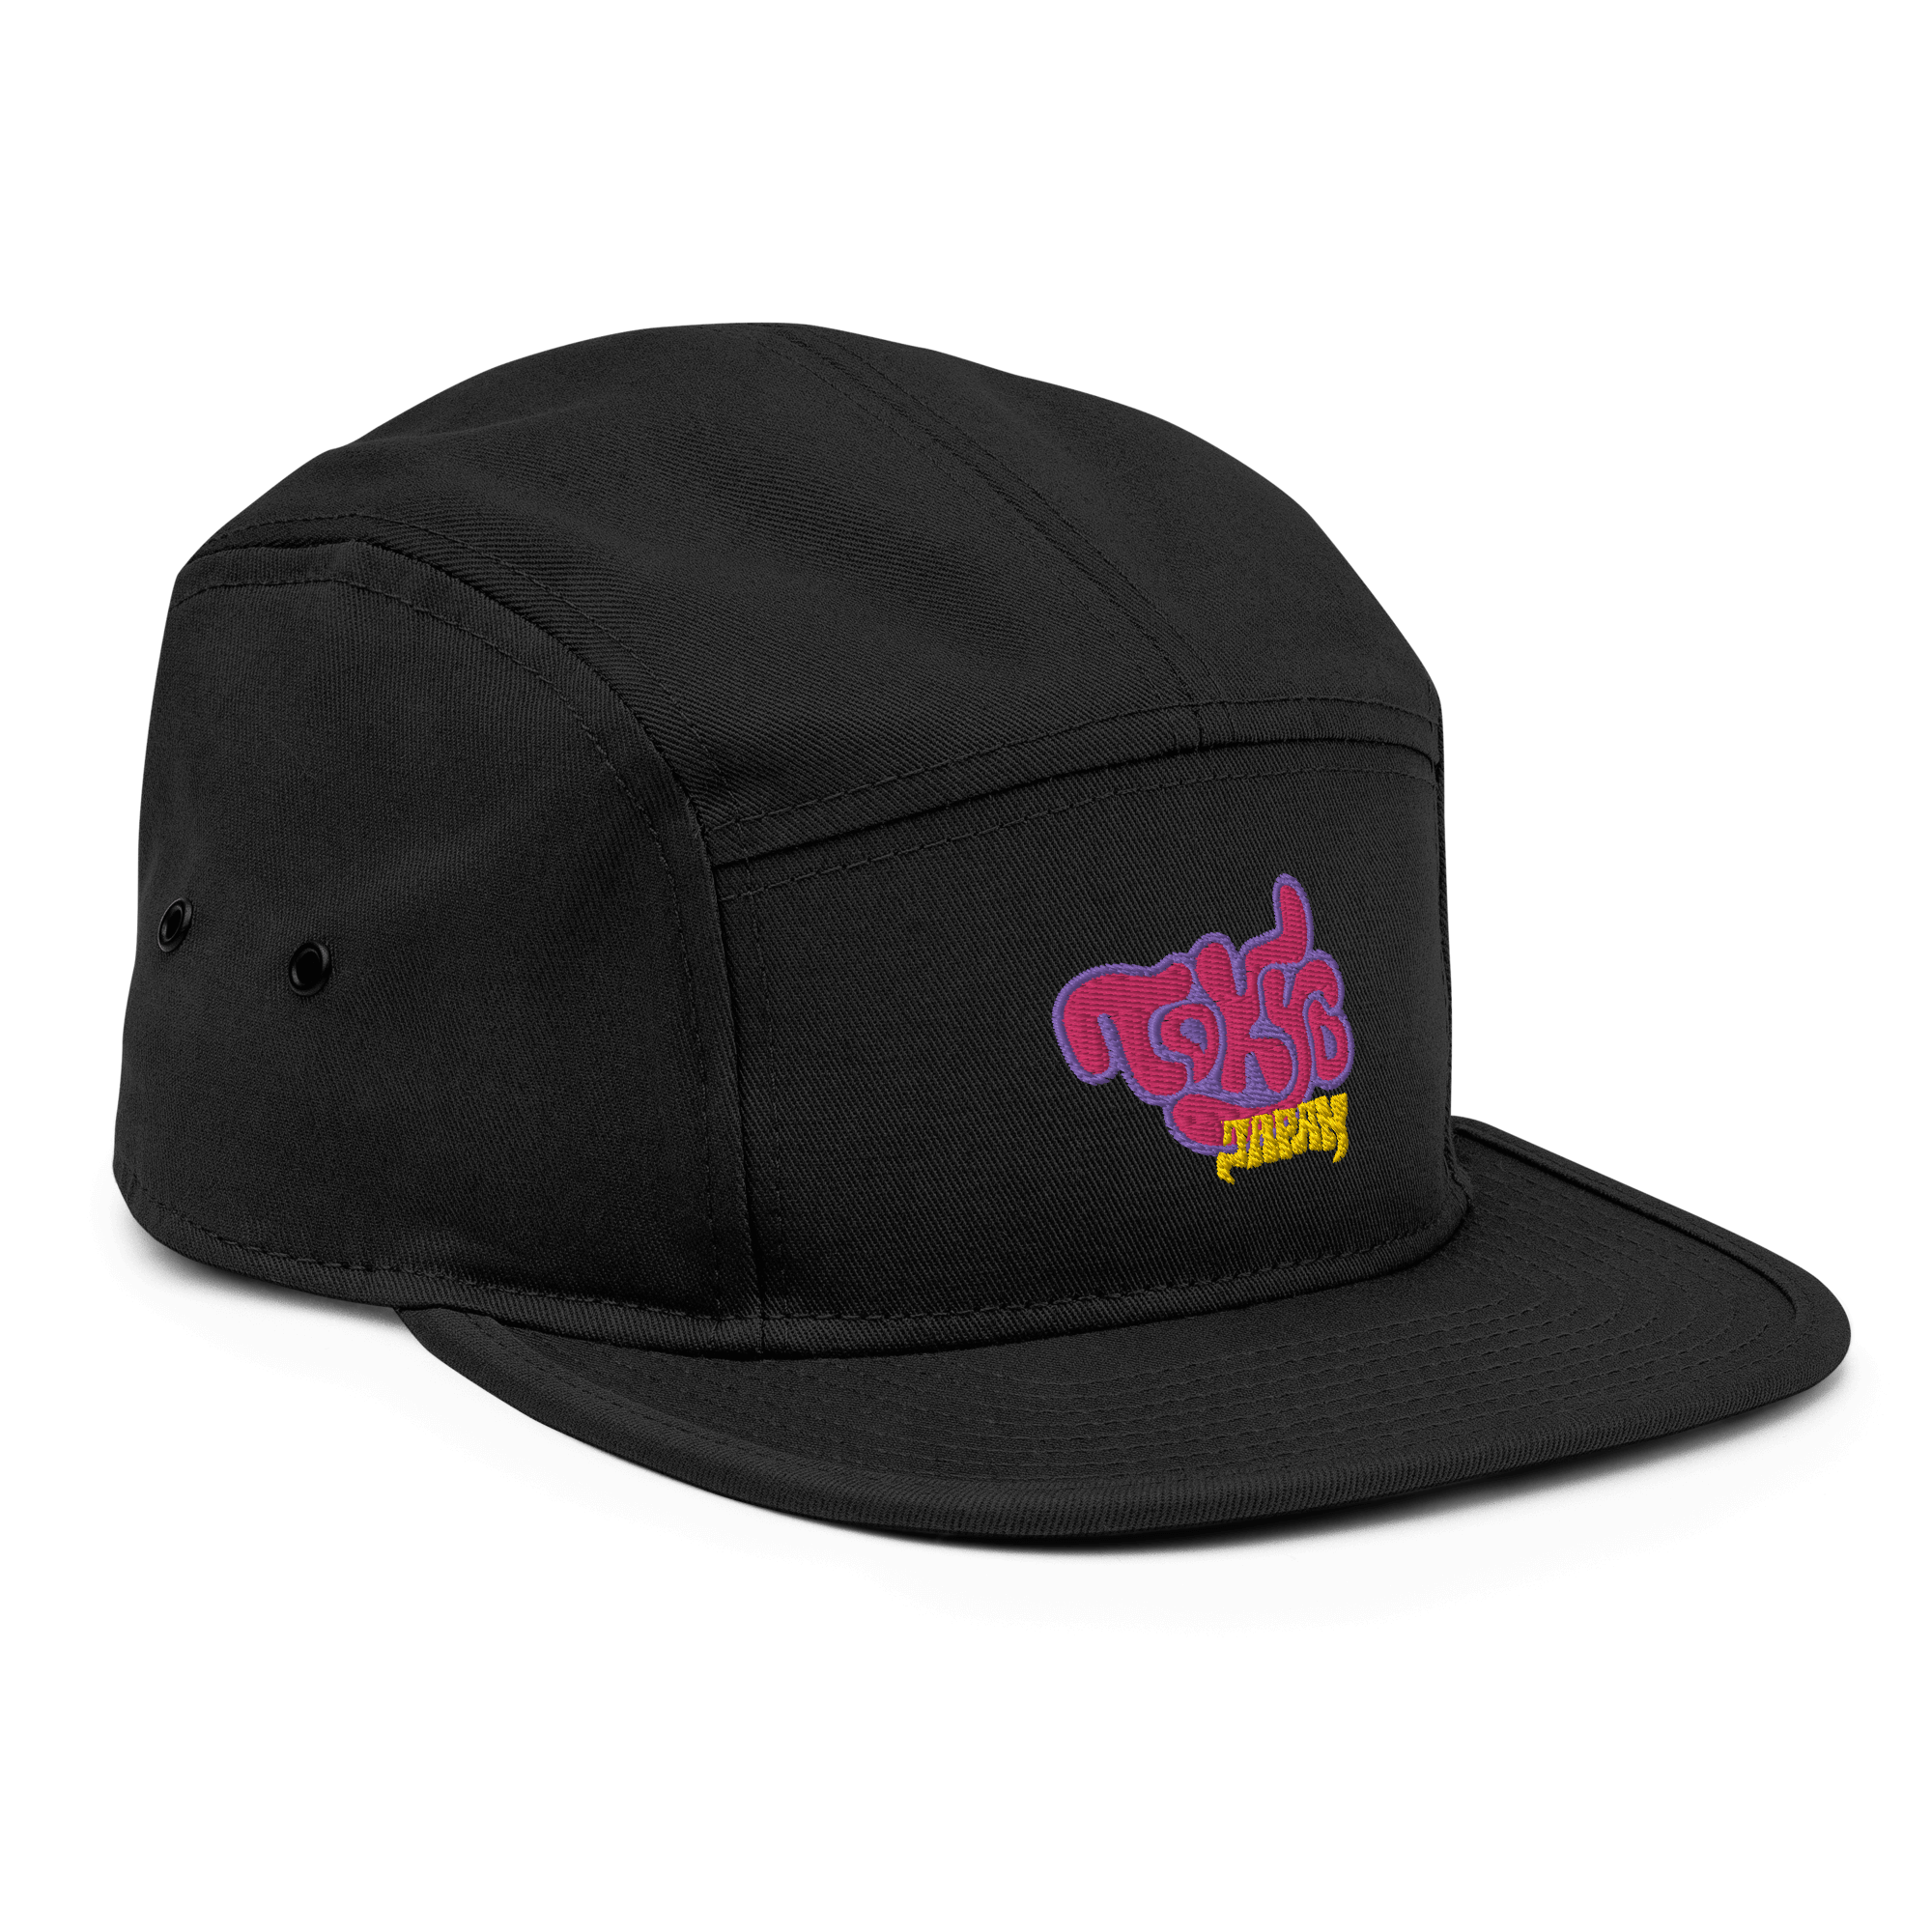 Tokyo Japan Camper CapElevate your style with the Tokyo Japan Camper Cap – a structured masterpiece with a firm front panel. Crafted exclusively for you upon order, the slight wait adds to its unique allure. Opting for on-demand production over bulk not o